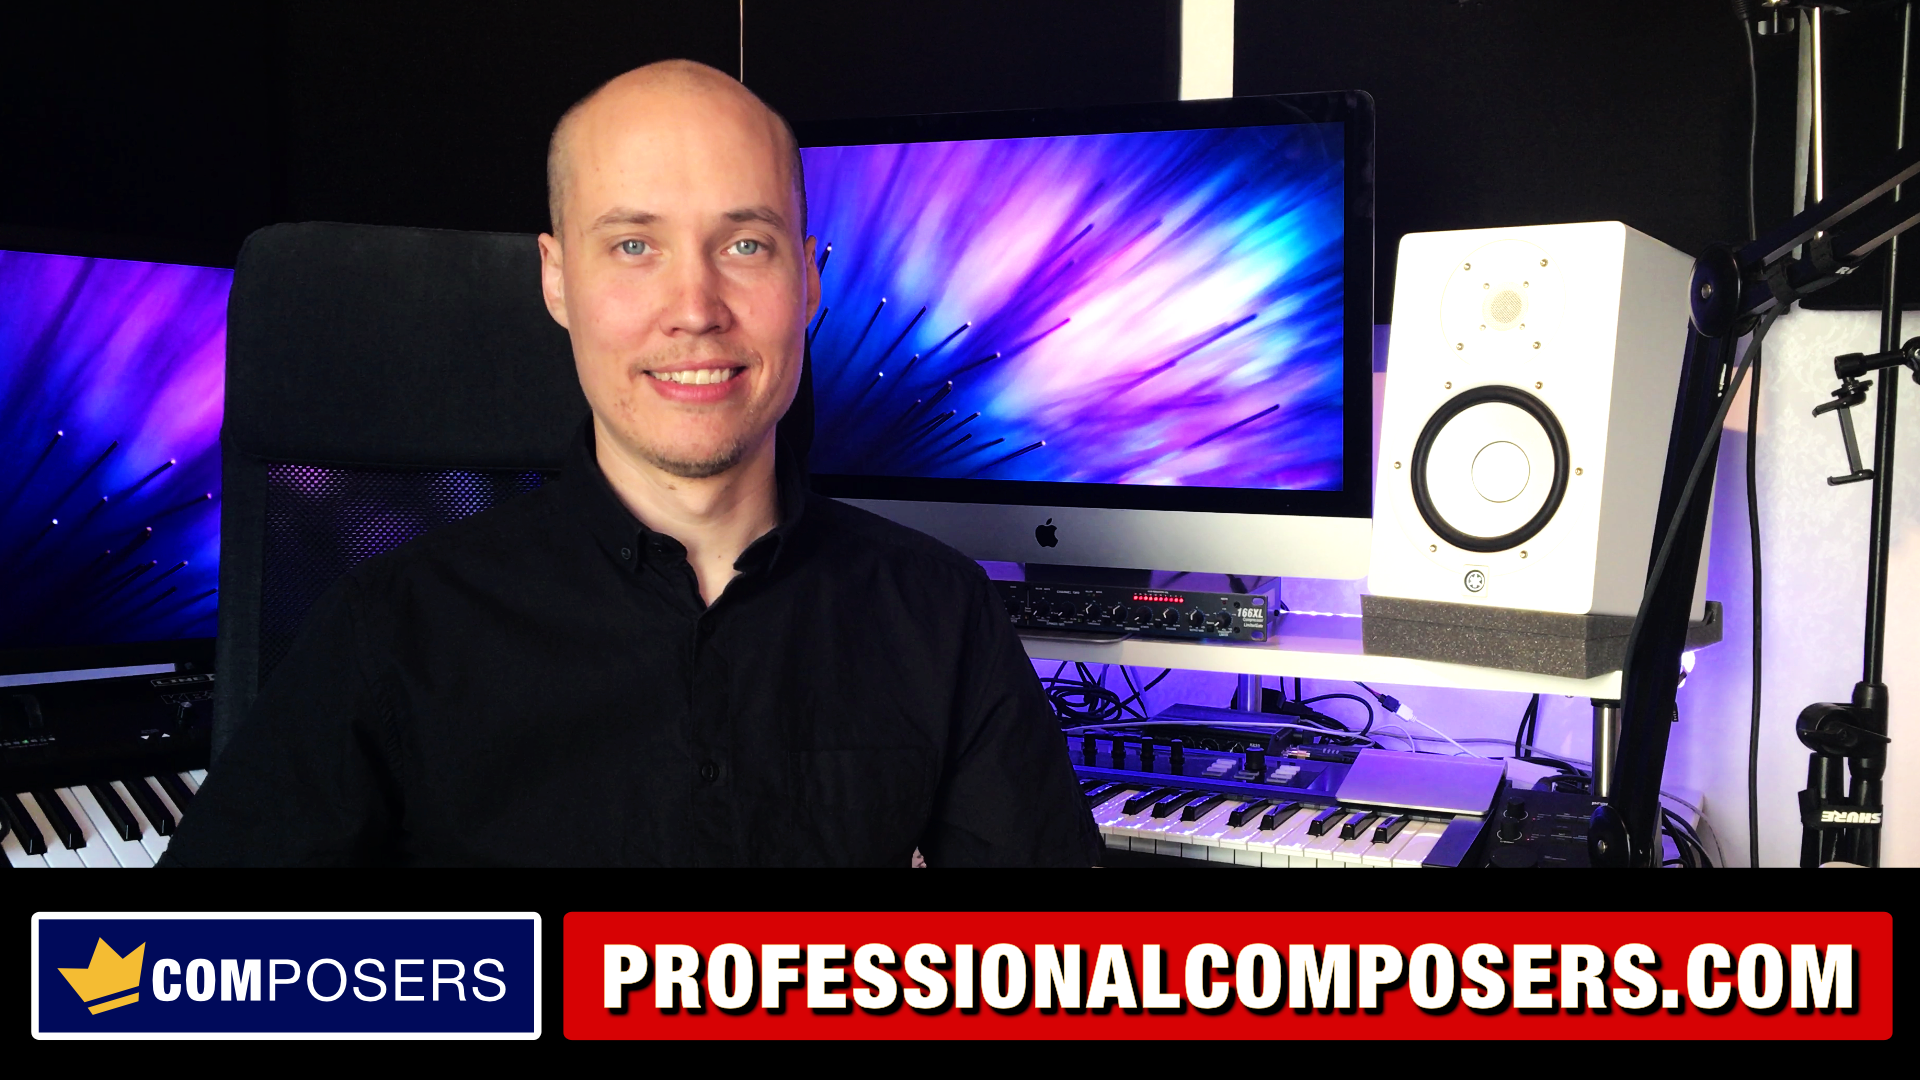 Mike - Founder of Professional Composers